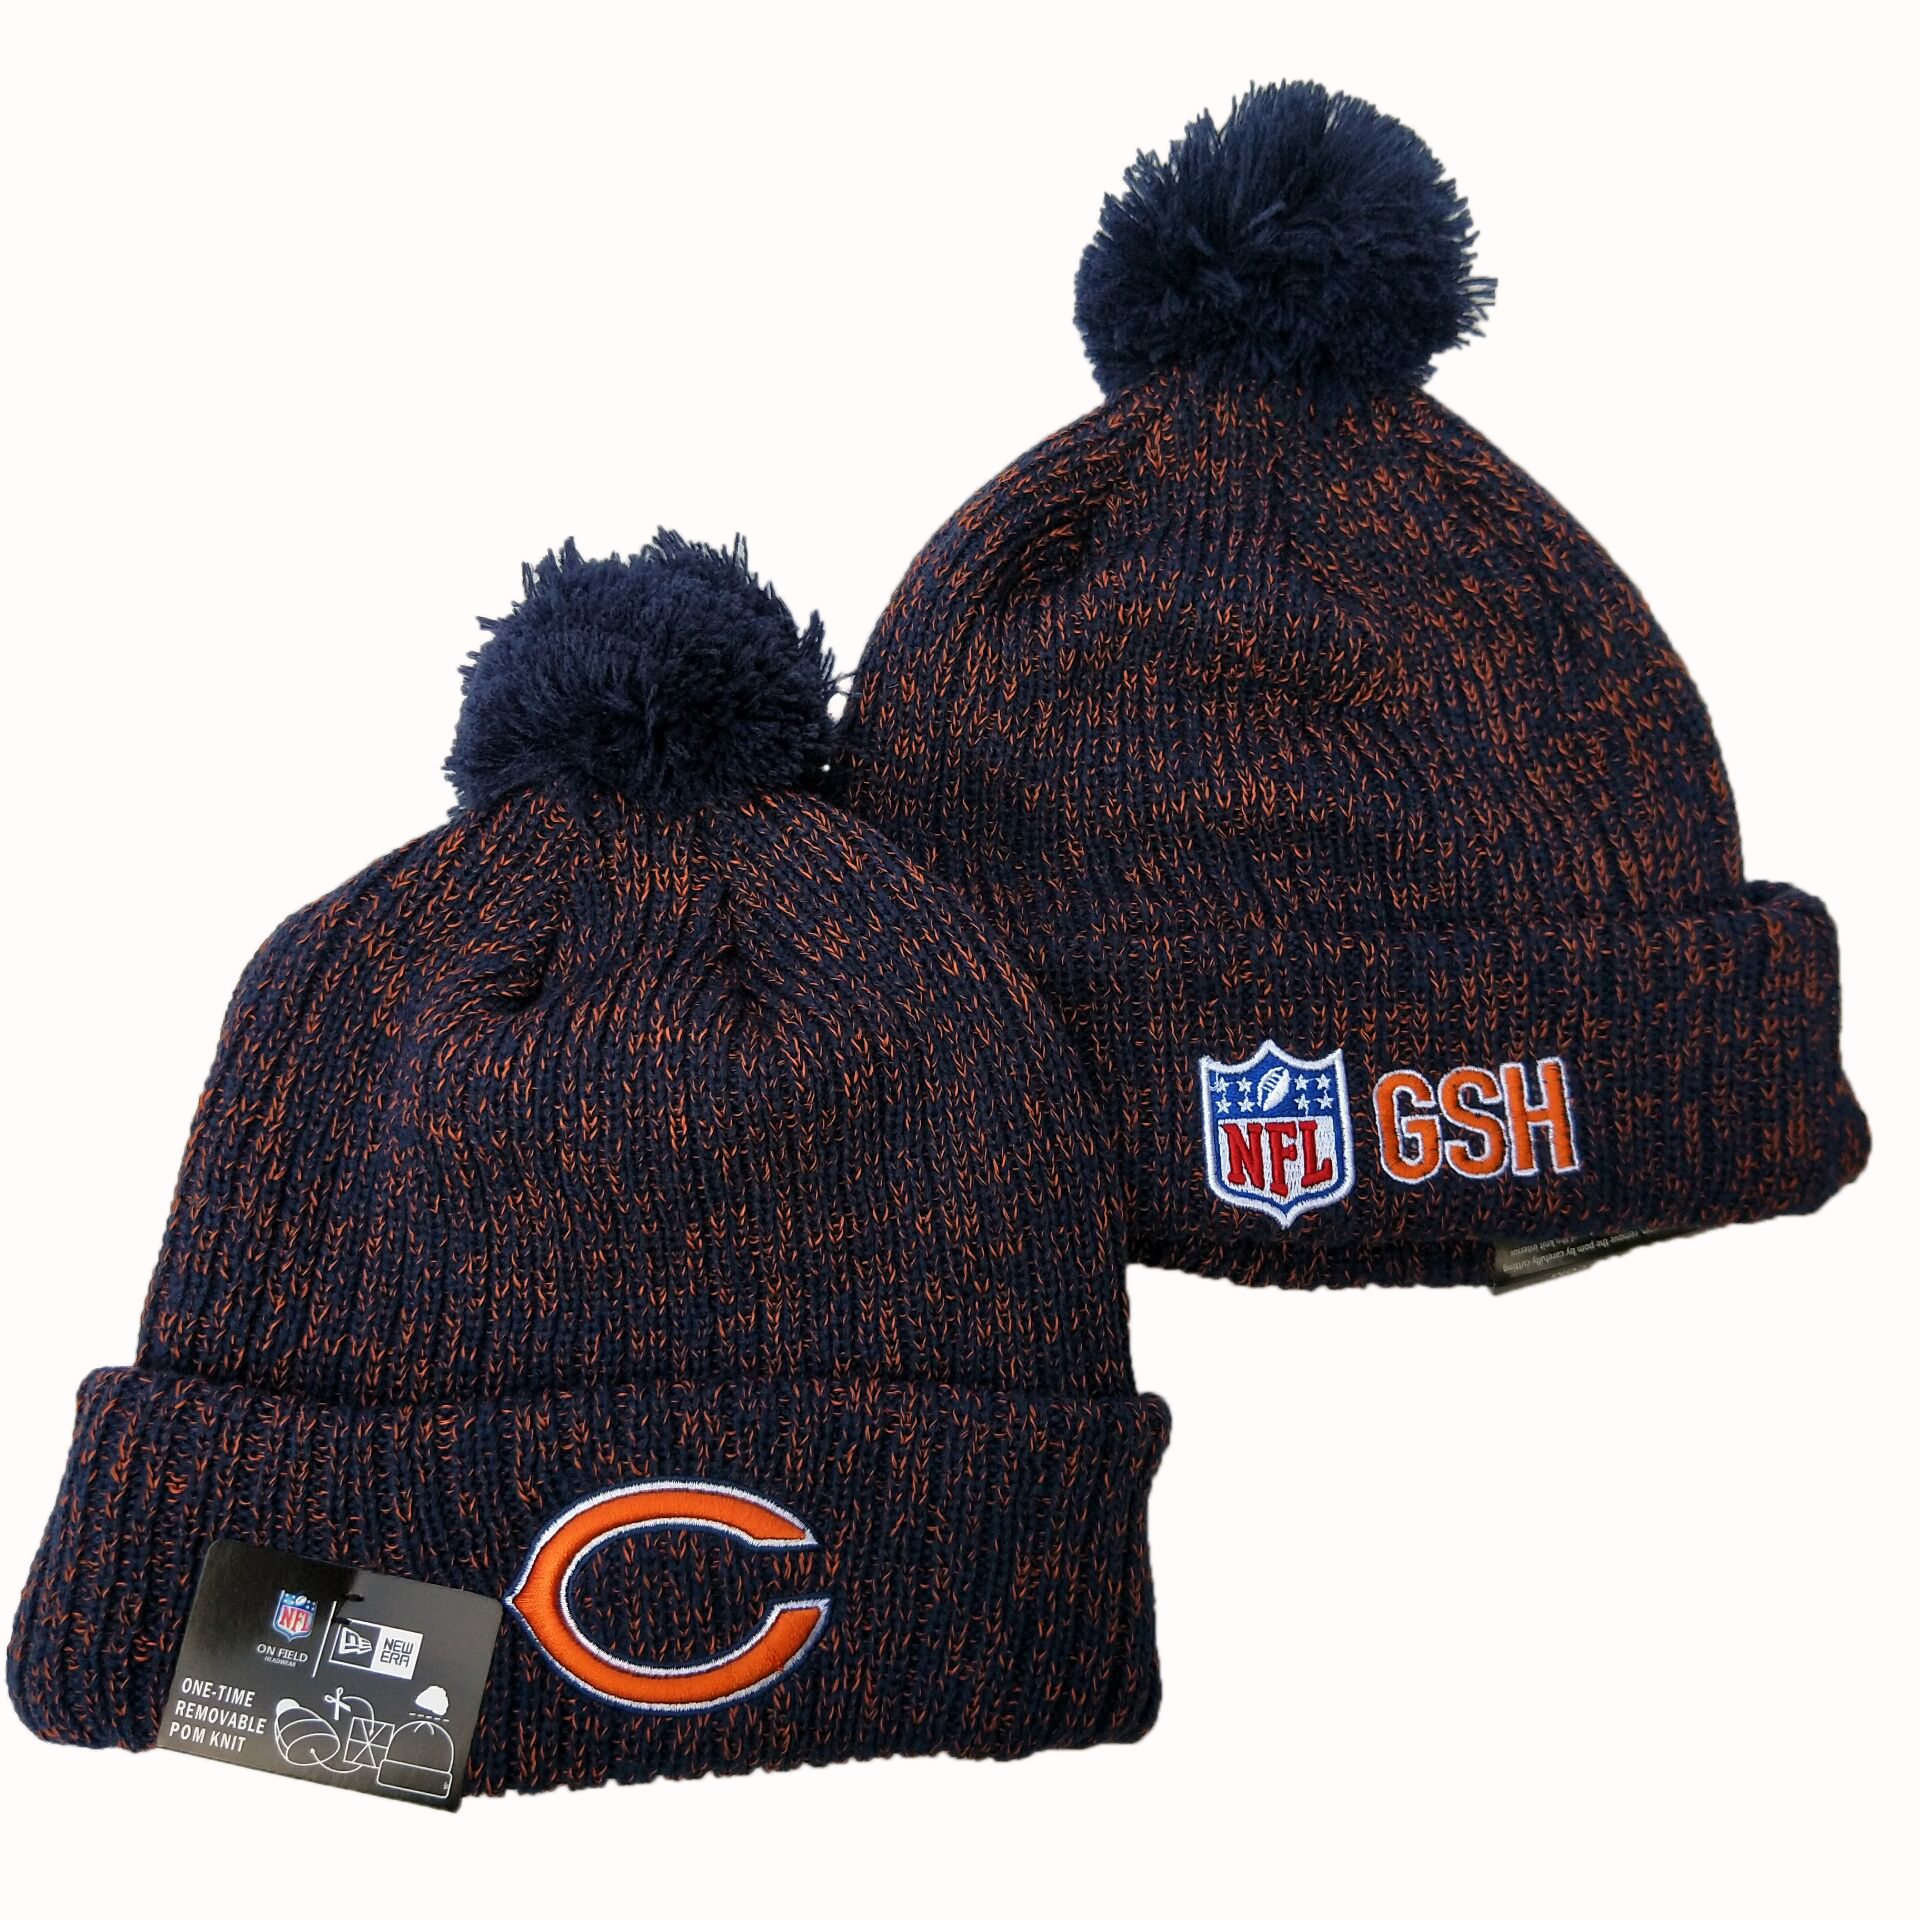 Chicago Bears Knit Hats 023